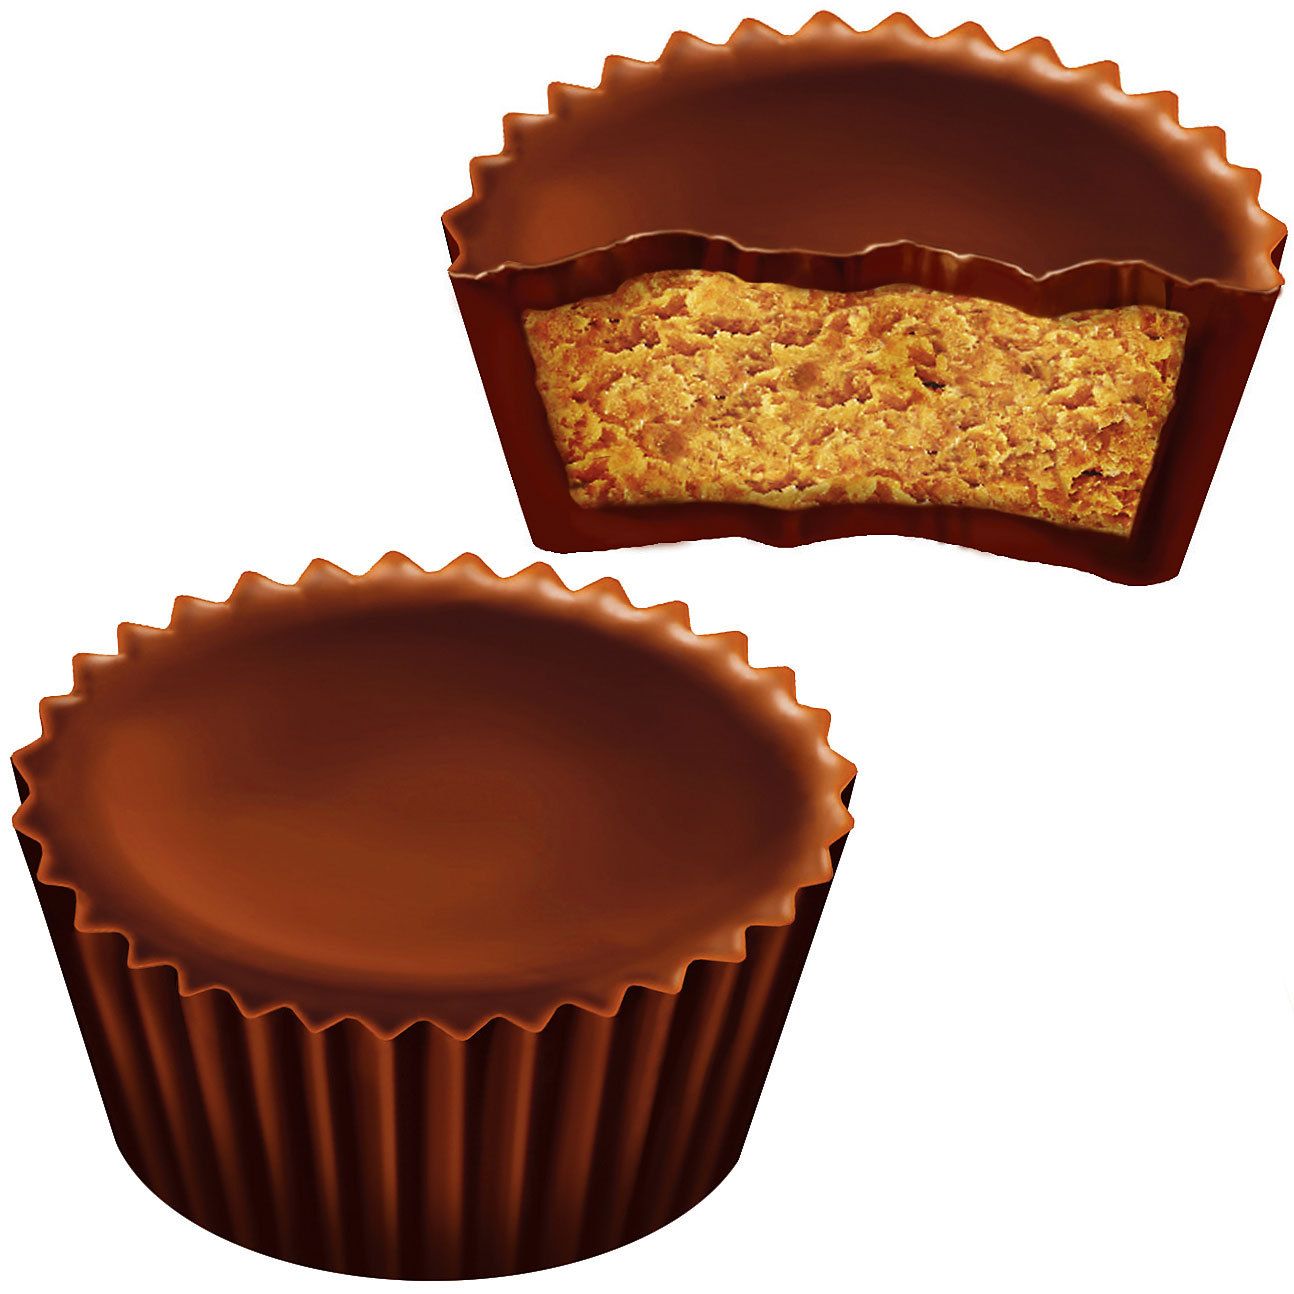 Single reese's peanut butter cup